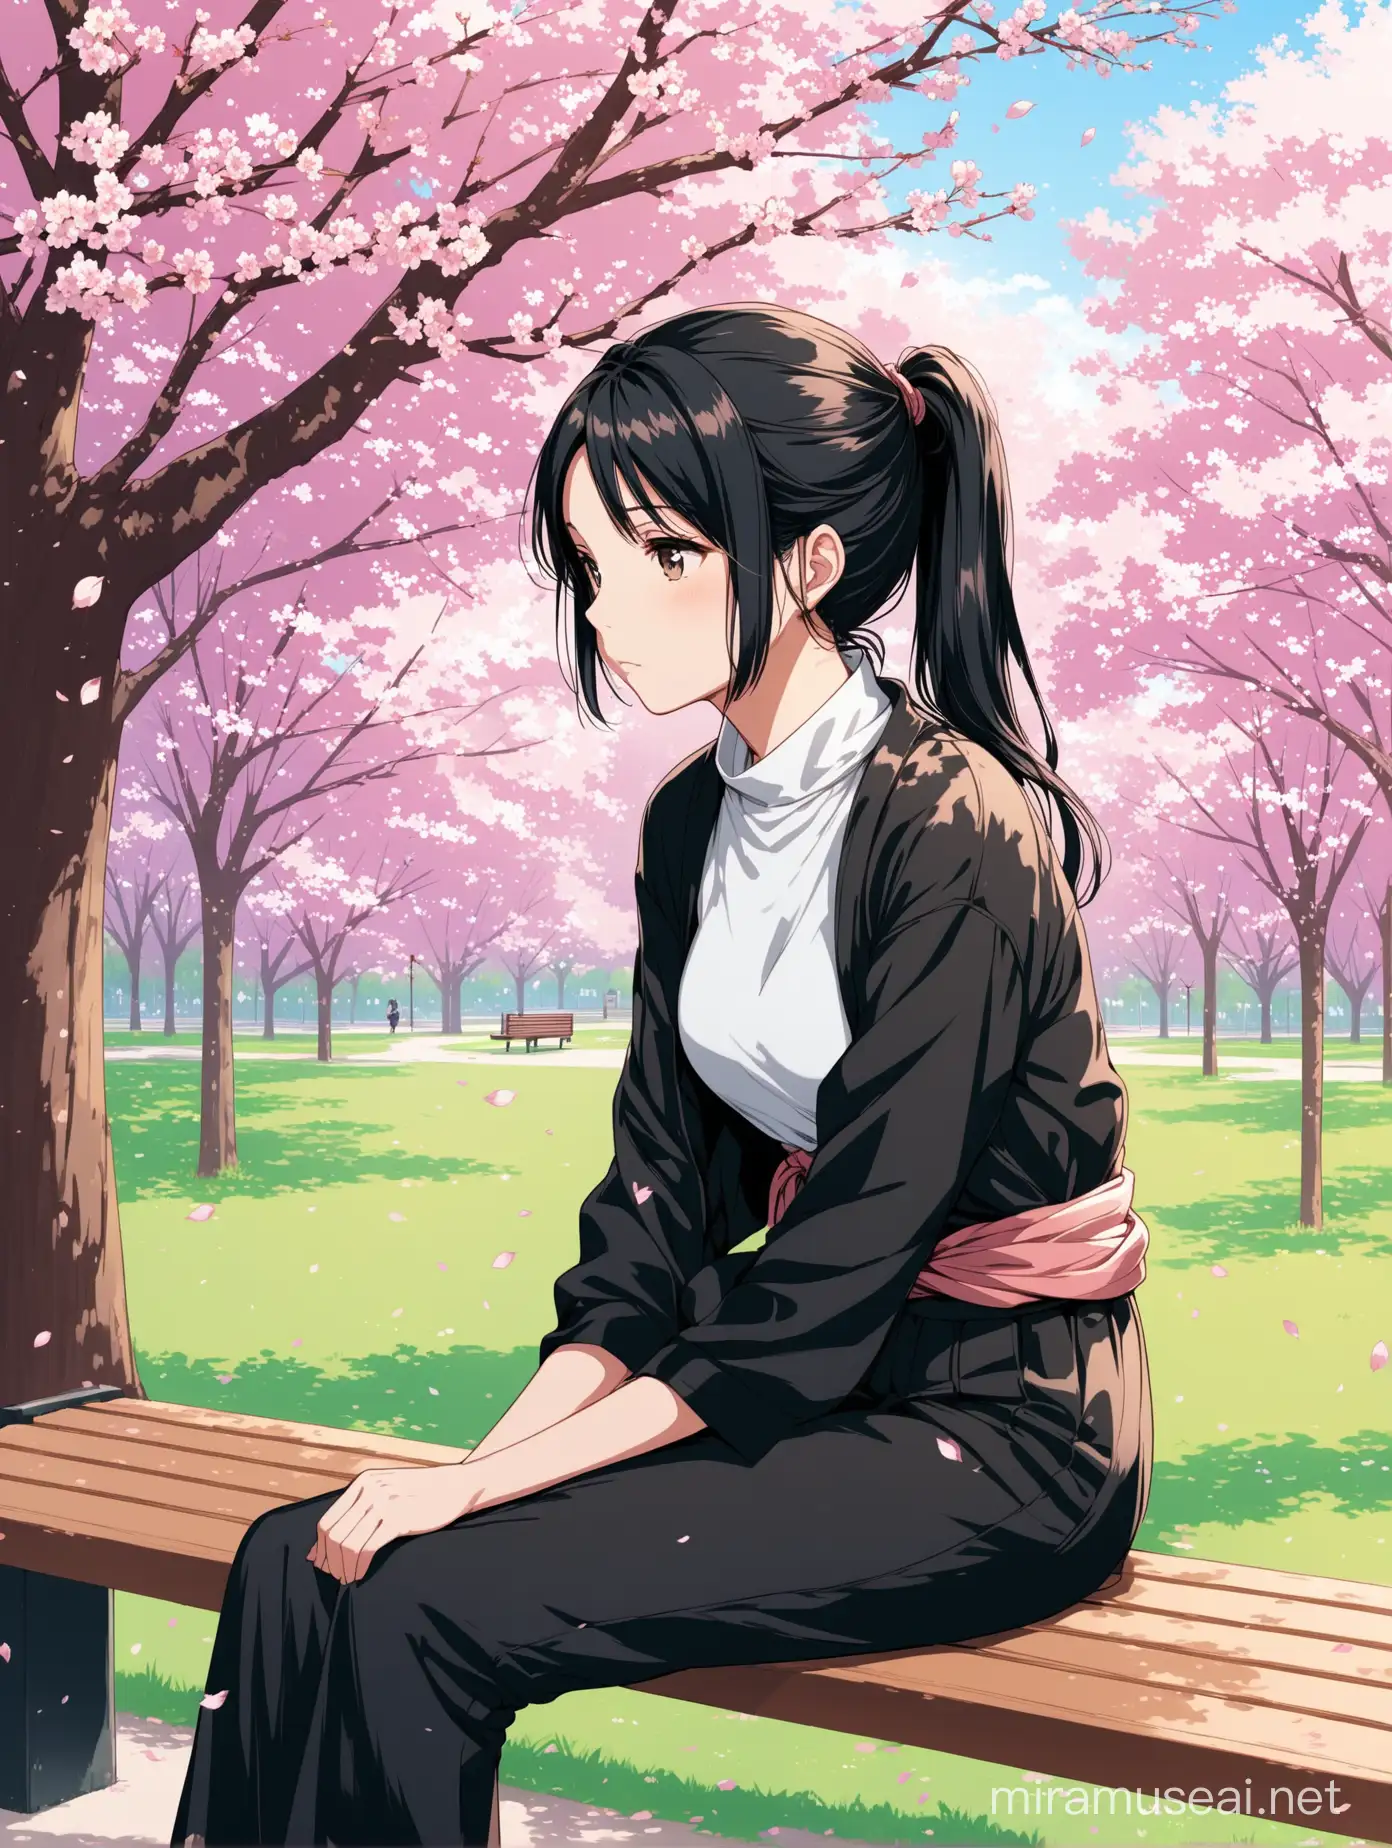 Contemplative Woman with AnimeStyle Black Hair Surrounded by Cherry Blossoms